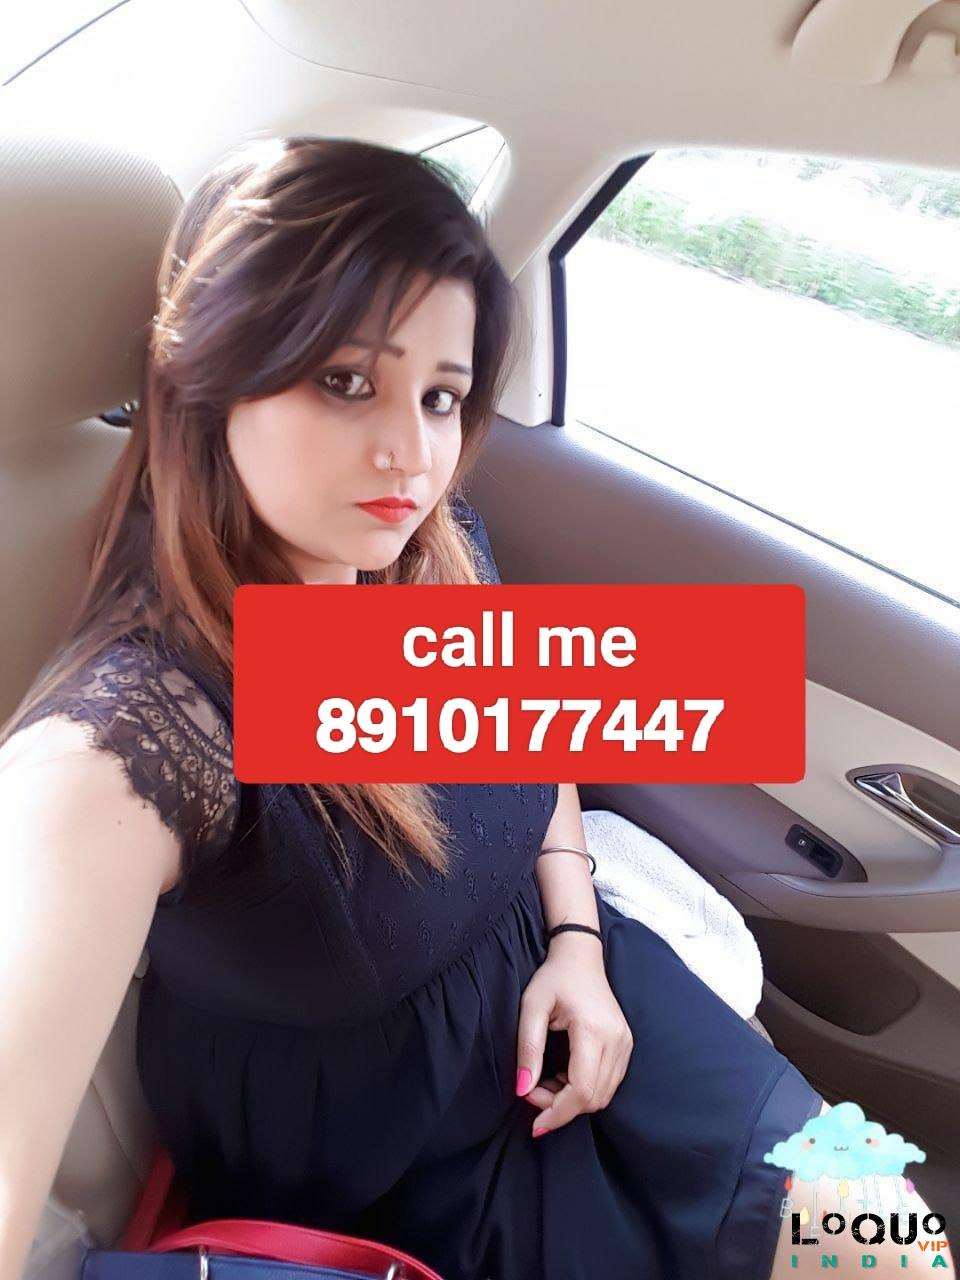 Call Girls West Bengal: Hooghly ❤CALL GIRL 89101*77447 ❤CALL GIRLS IN Hooghly ESCORT SERVICE❤CALL